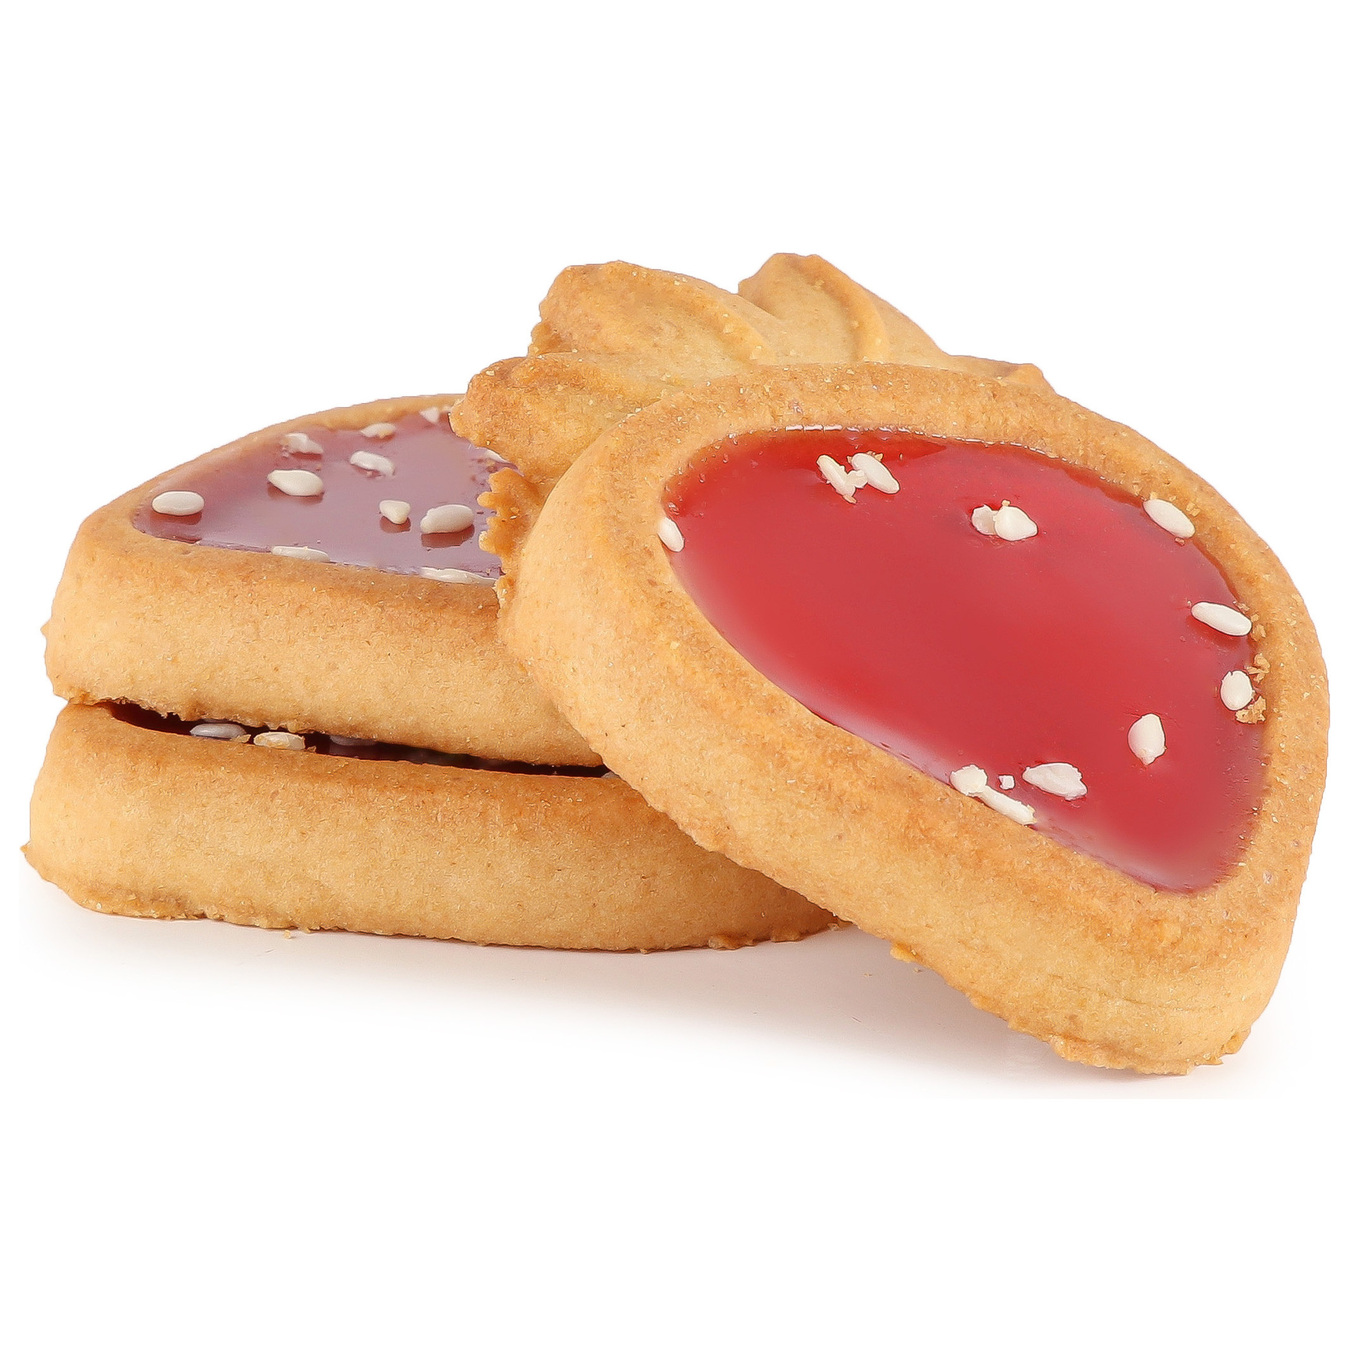 Cookies Delicia butter jelly berries strawberry flavor 300g 2